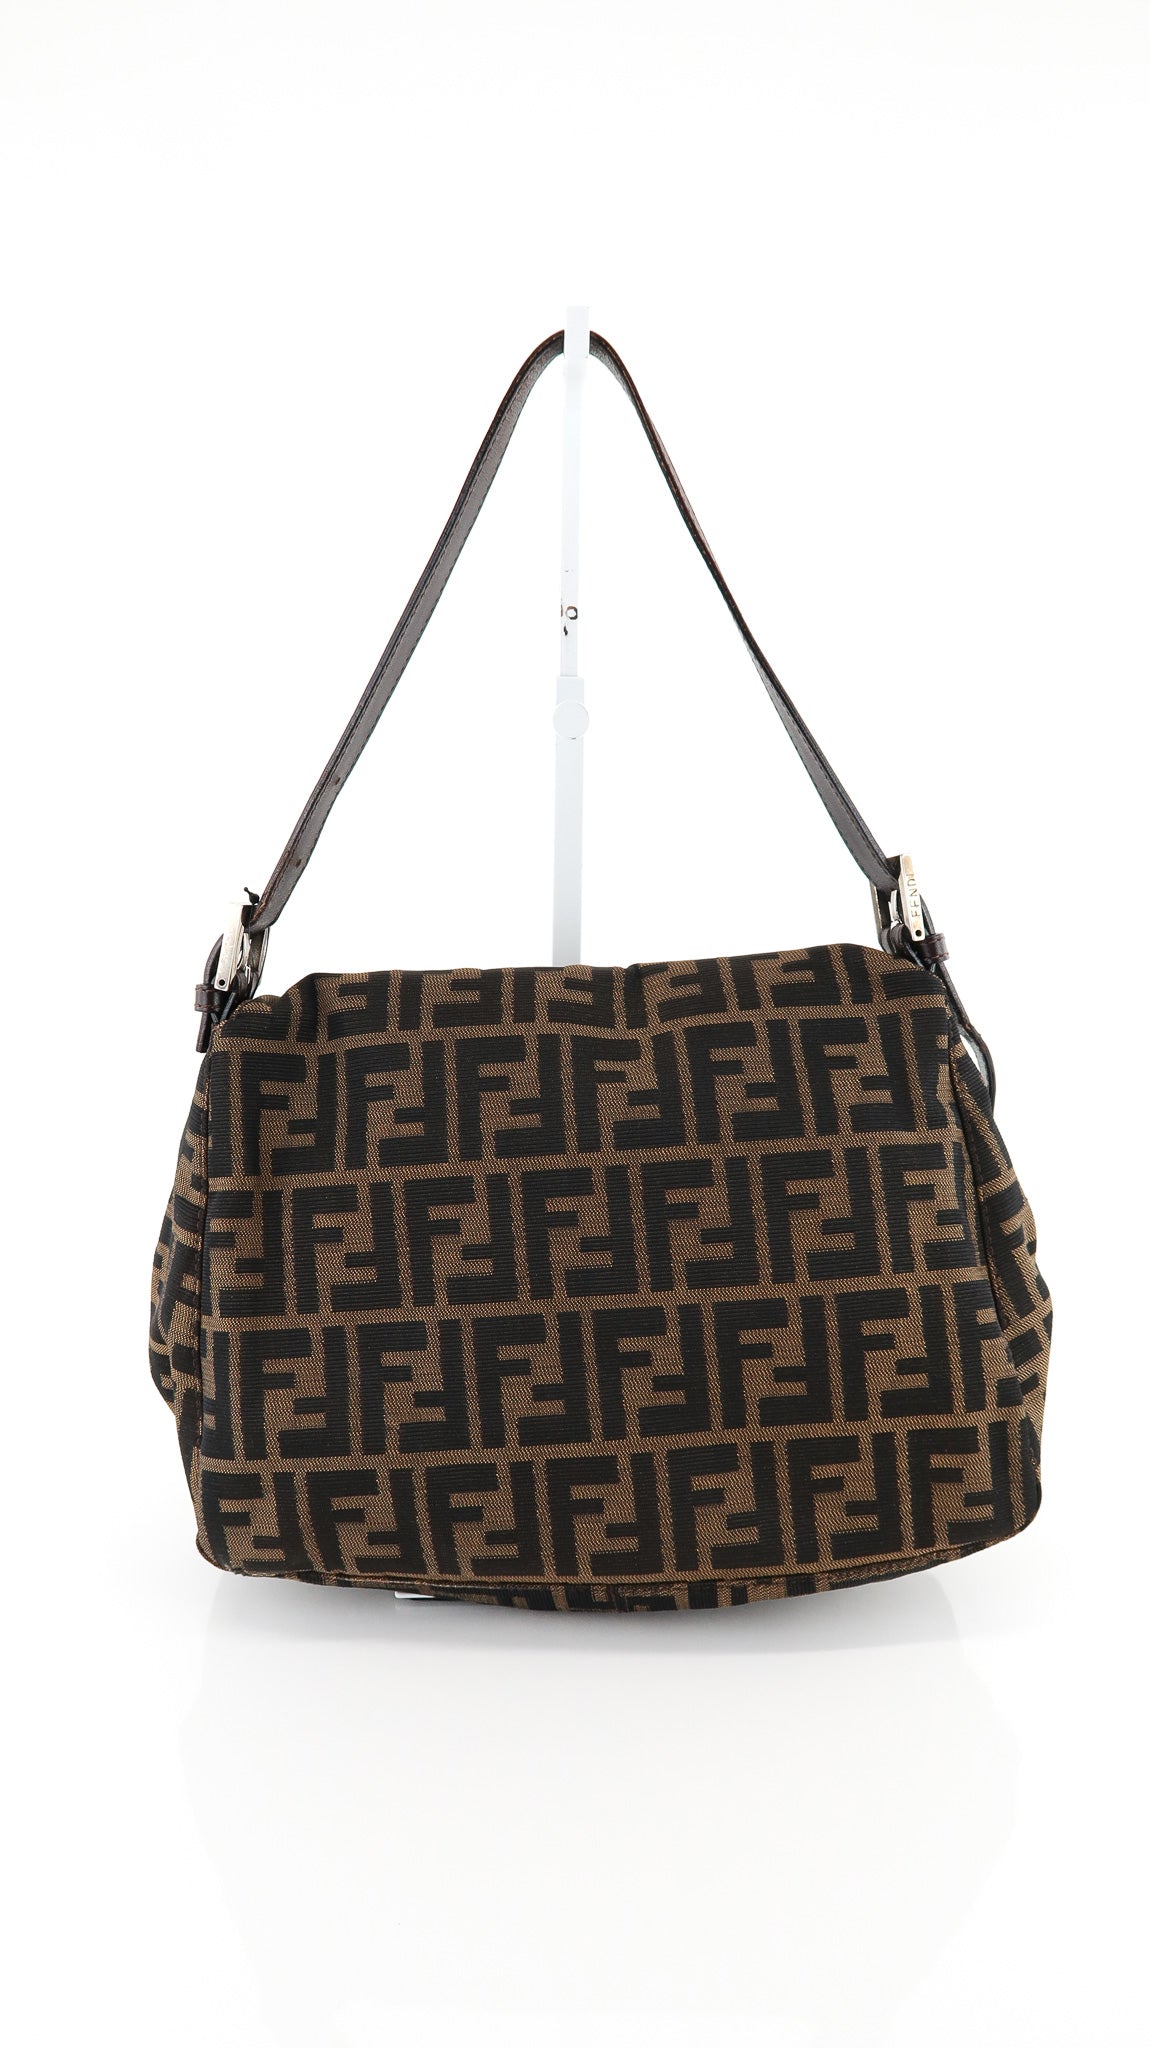 fendi's baguette bag will never go out of style. Swipe to see it